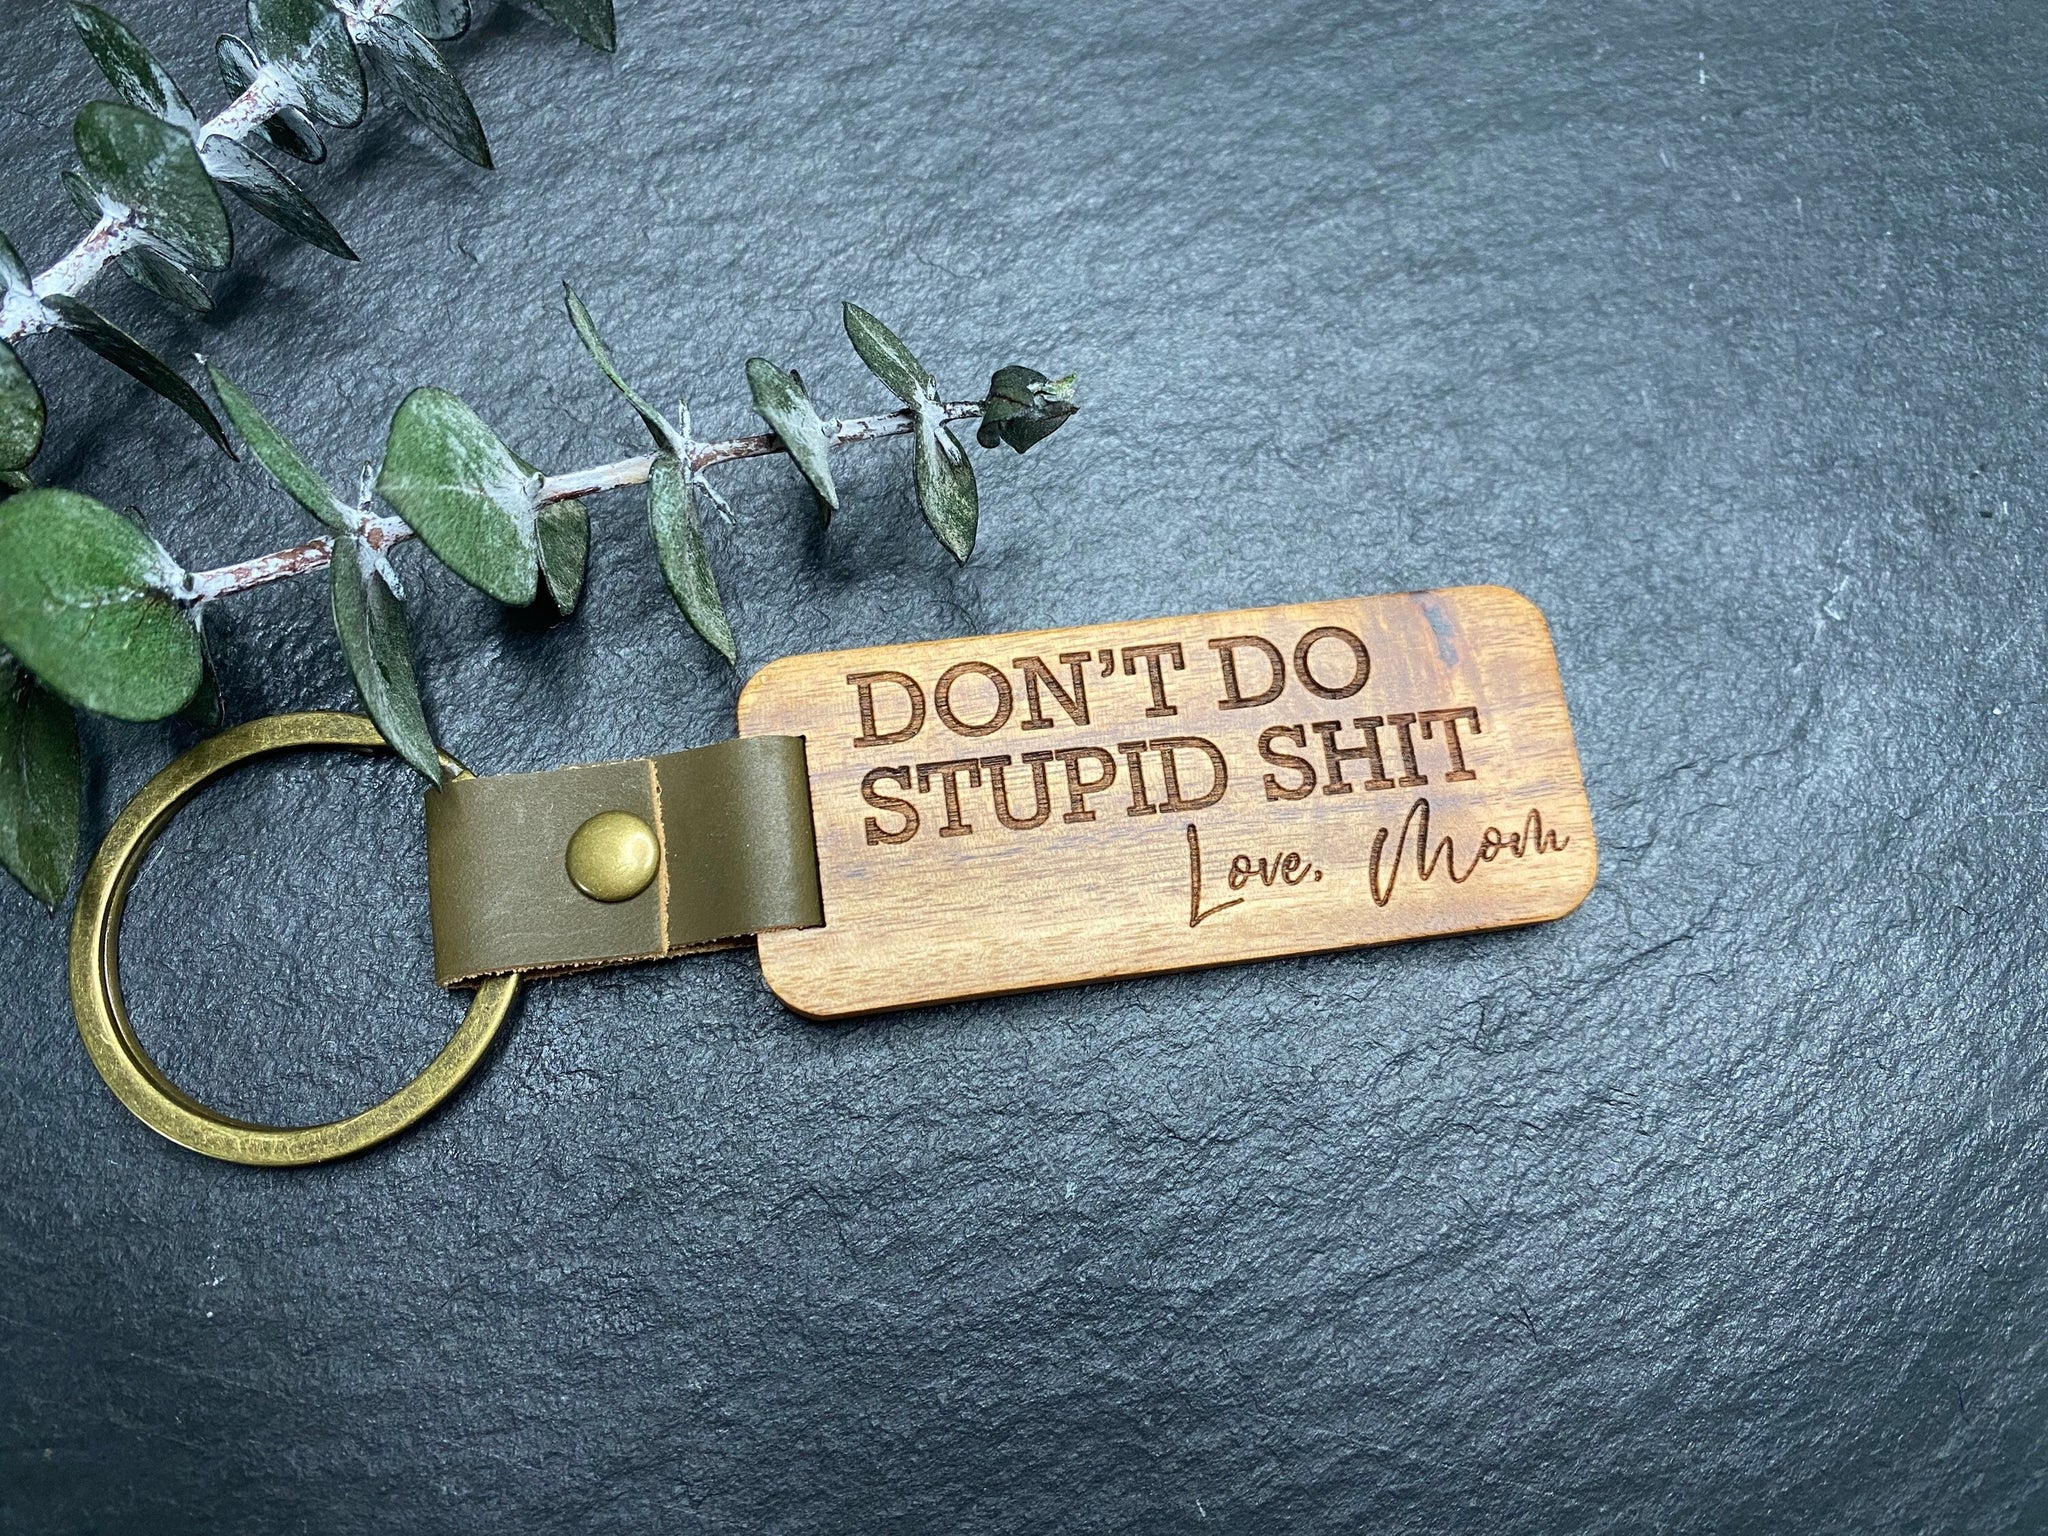  Don't Do Stupid Shit Keychain, 16th Birthday Gift, Stainless  Steel, Love Mom, Love Dad, Love Mom & Dad, Gift for Son, Gift for Daughter,  Christmas, Birthday, New Driver Gift, Adulting 